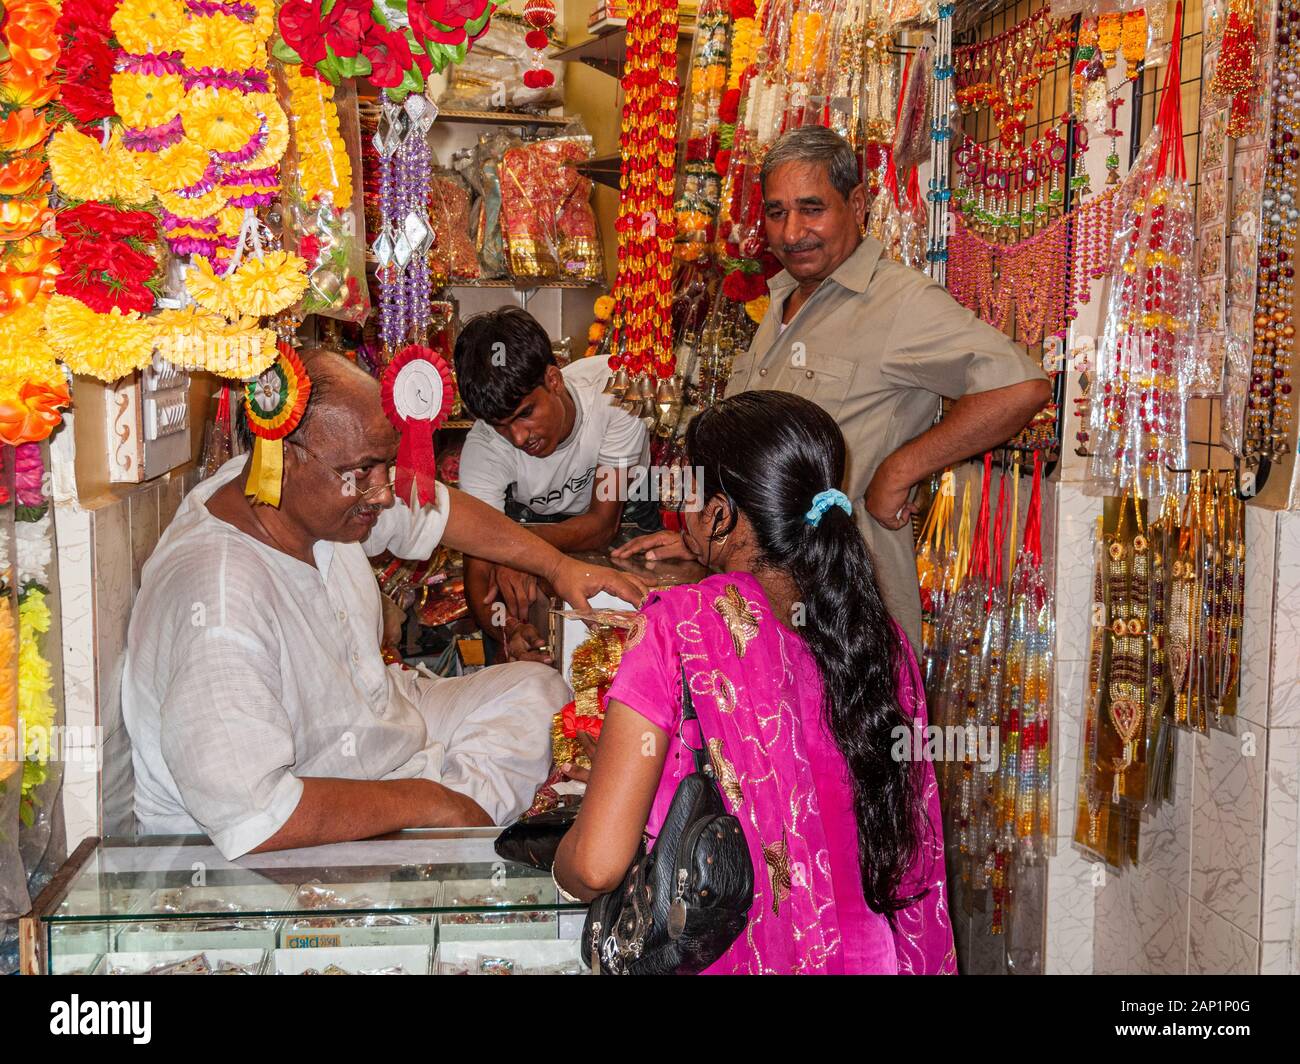 A vendor is selling artificial flowers and garlands in a colorful  shop Stock Photo